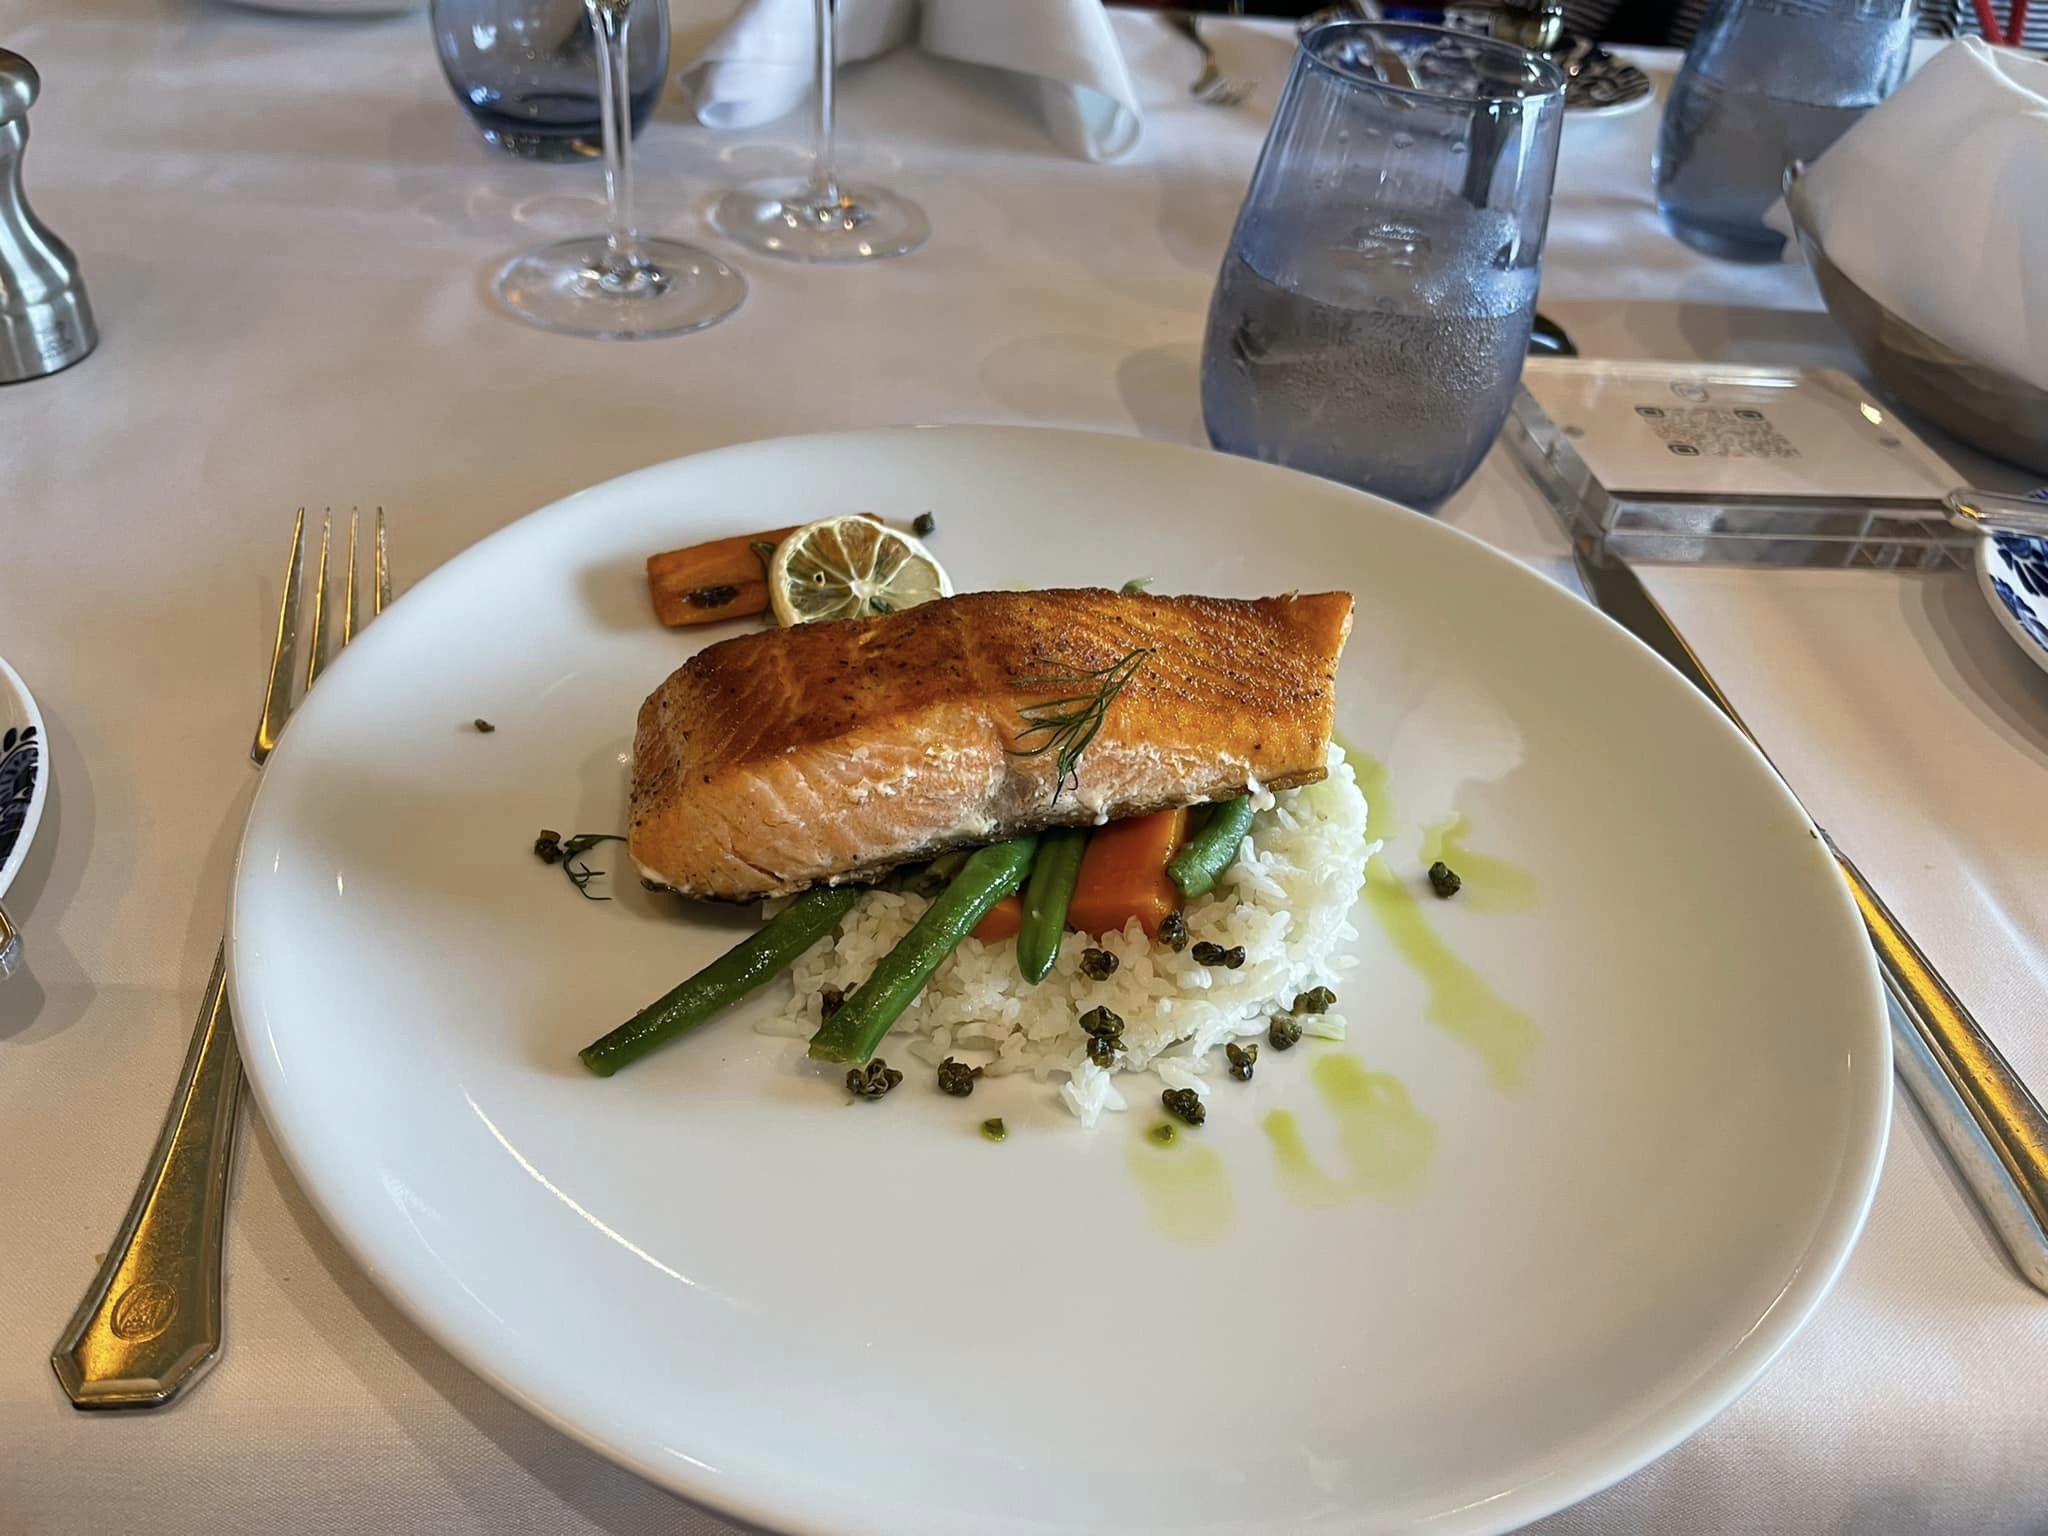 Baked salmon with rice and vegetables on a white plate set on an elegant table